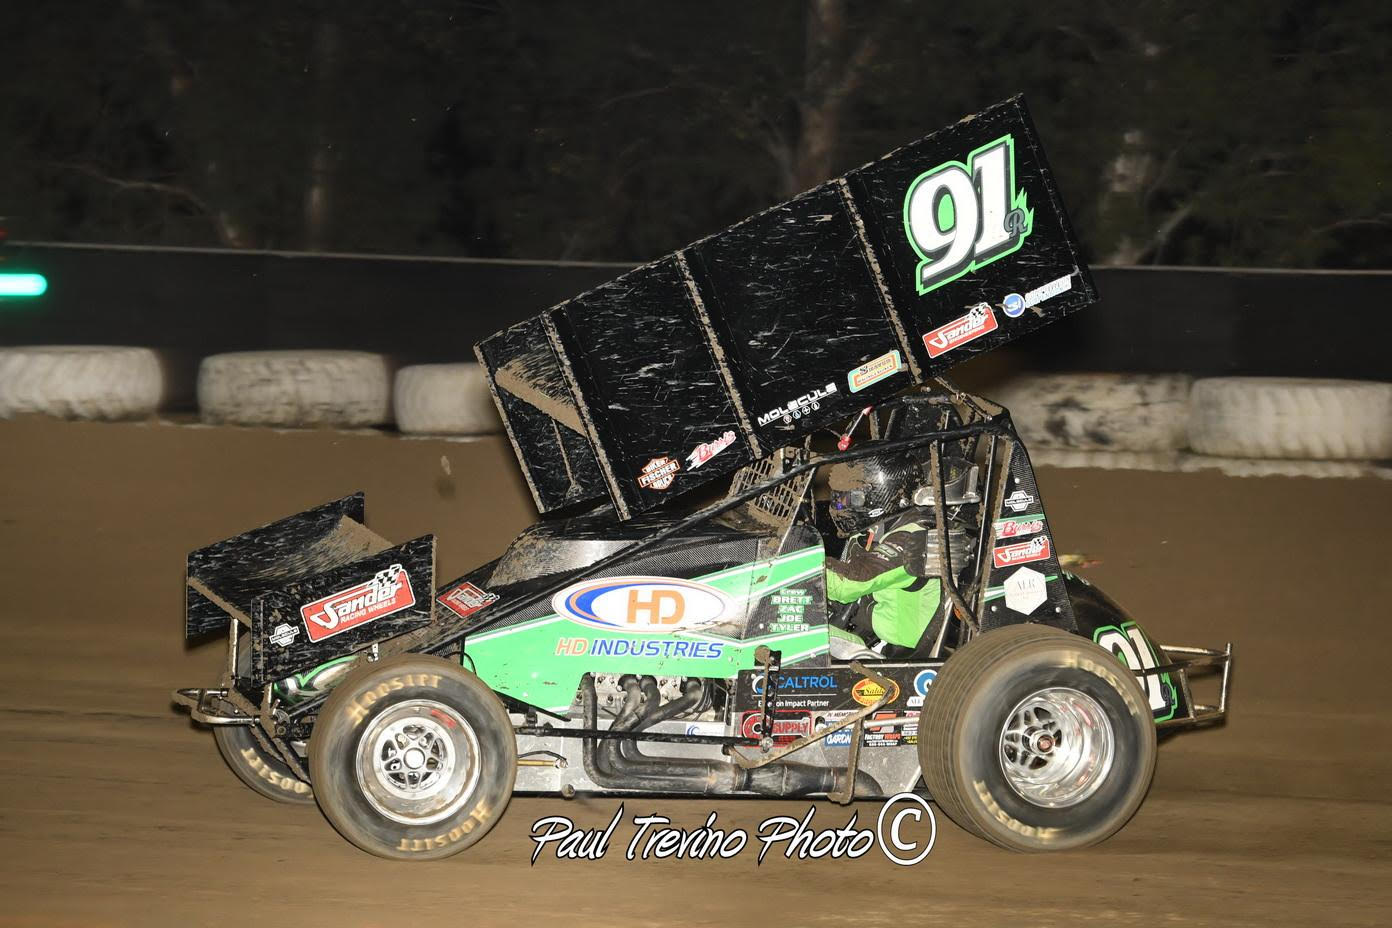 ROA GETS 9TH PLACE FINISH IN WING RACE – WORLD OF OUTLAWS NEXT